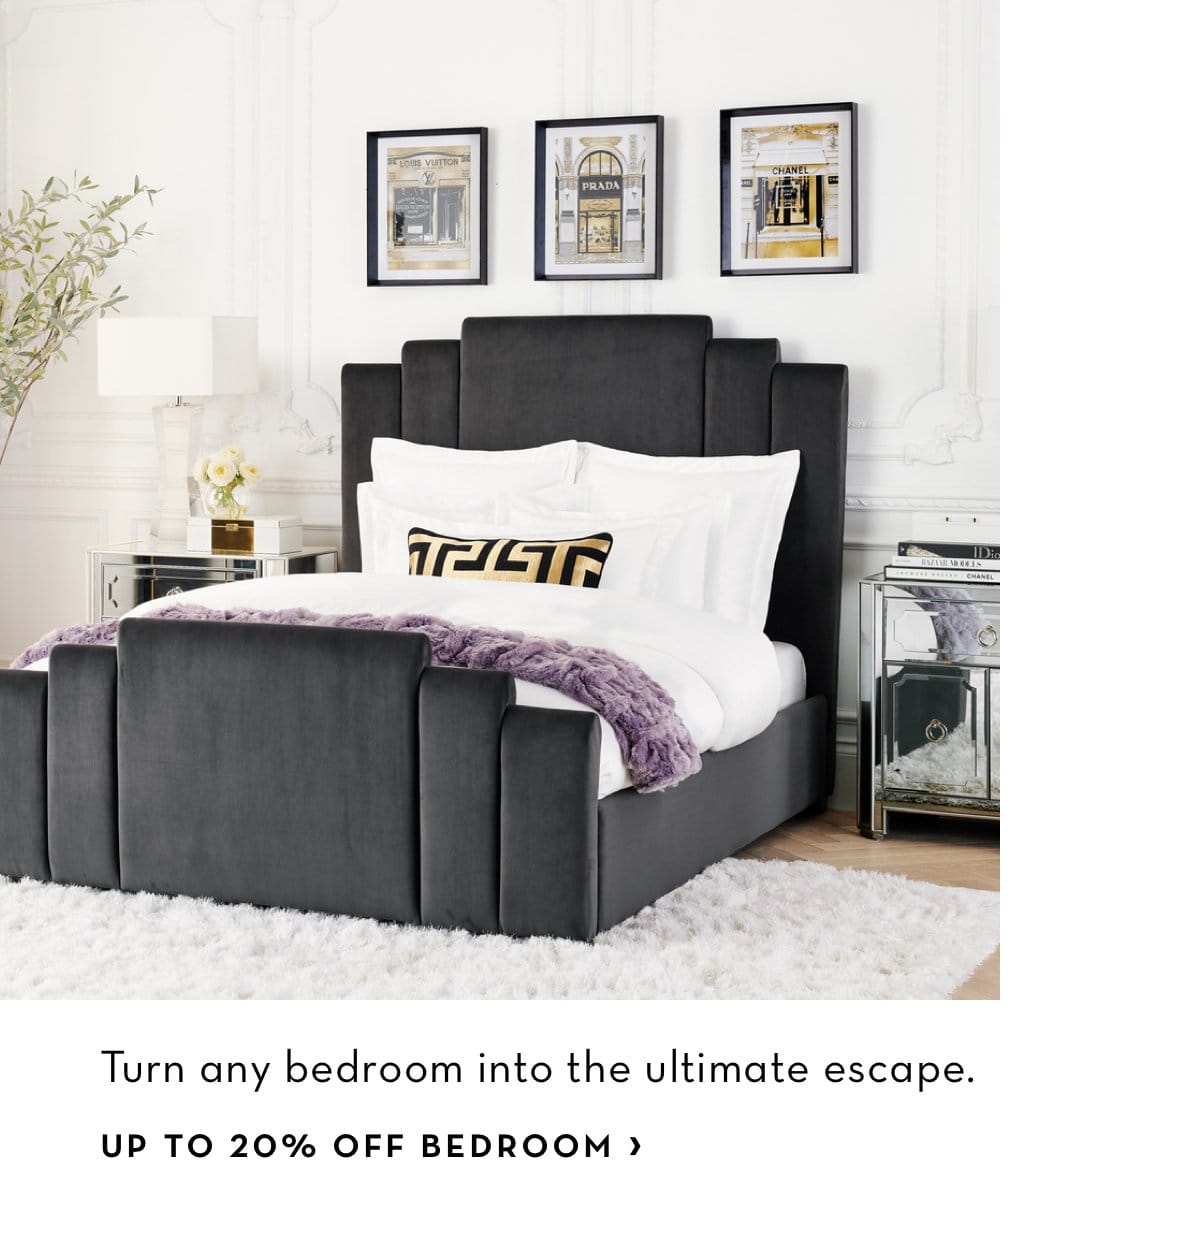 Up to 20 Percent Off Bedroom